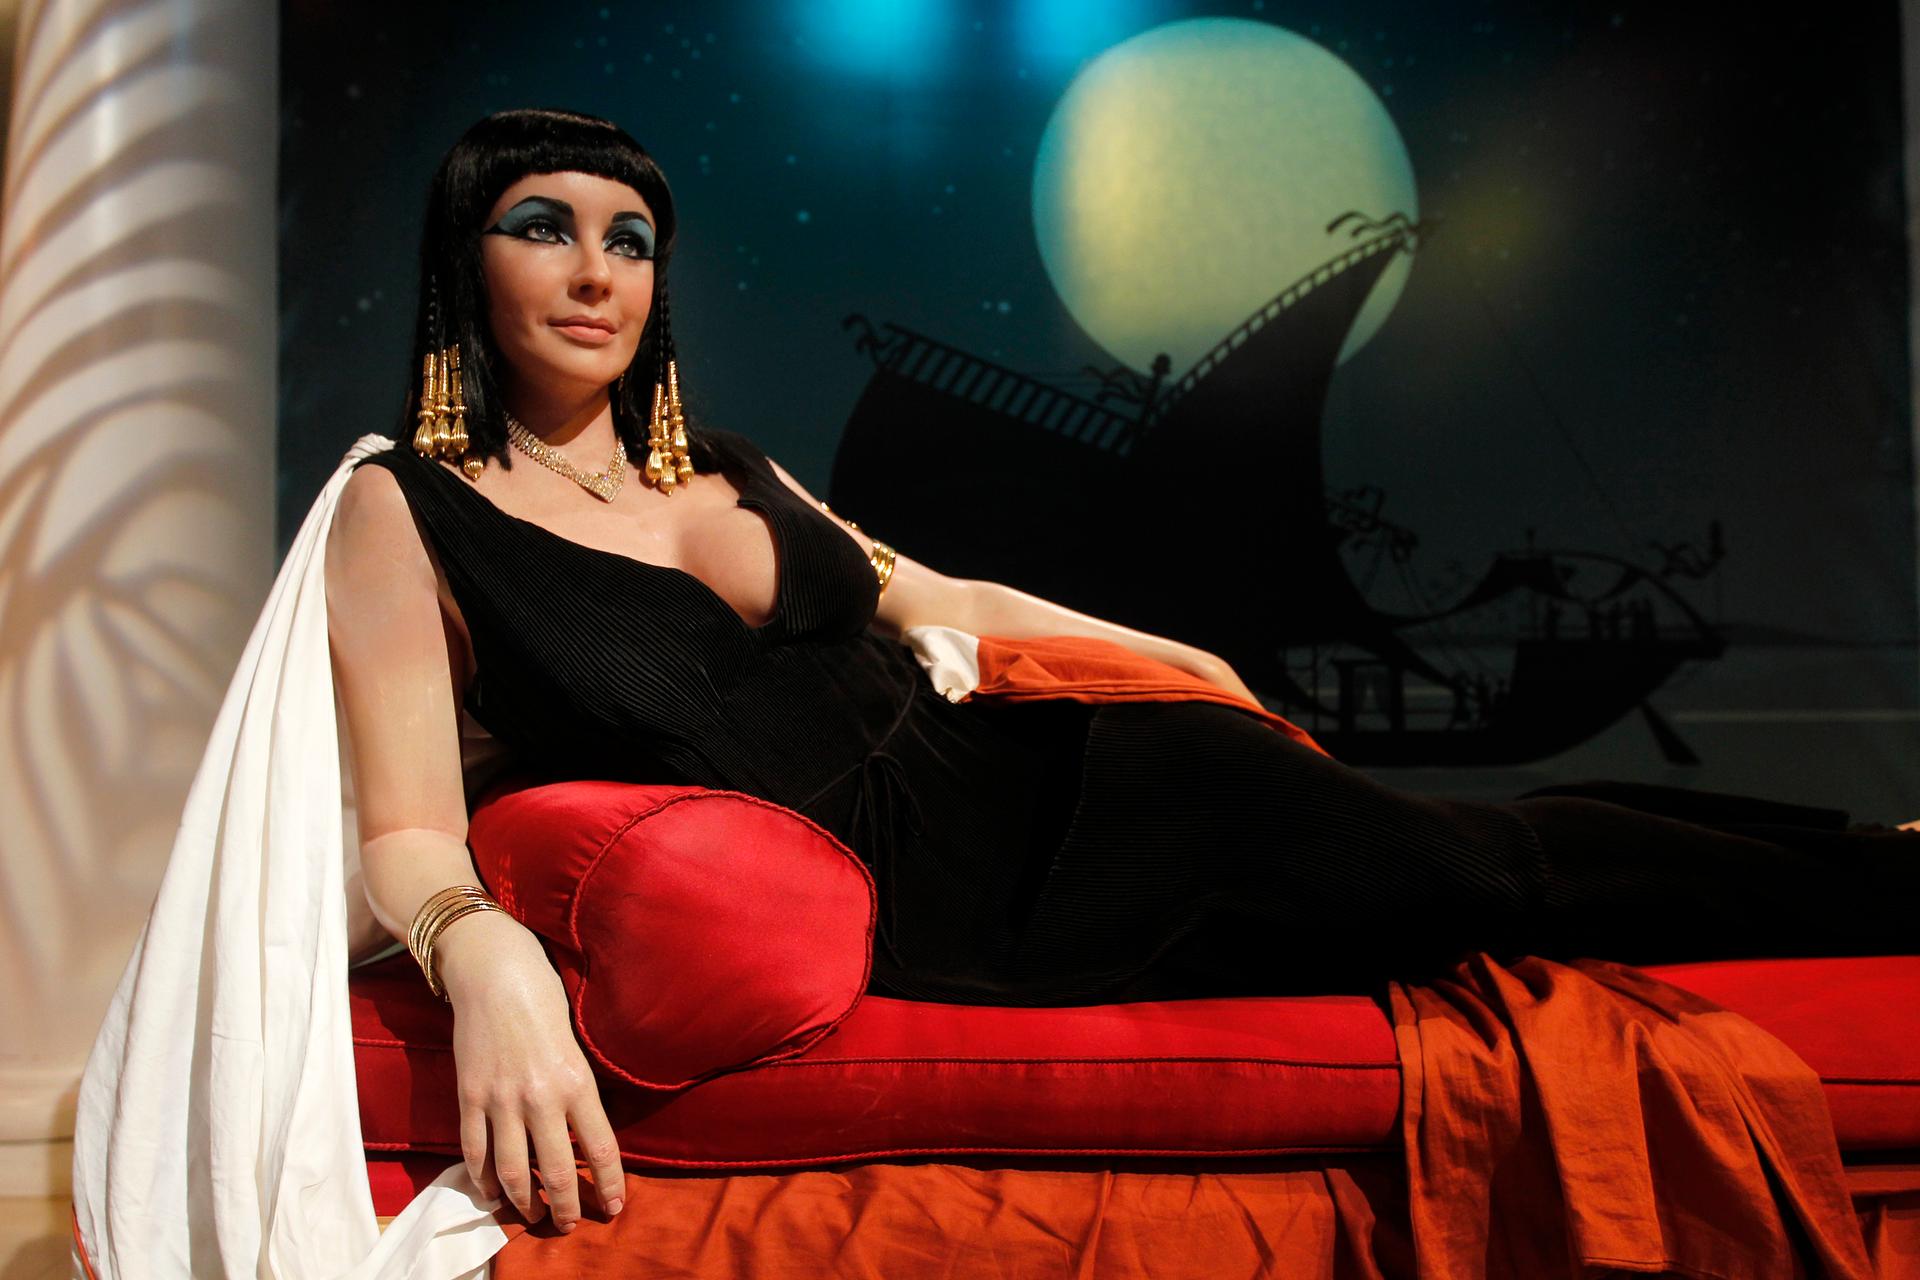 Elizabeth Tyler as Cleopatra lounges on a red cushion, he straight dark hair decorated with gold beads.